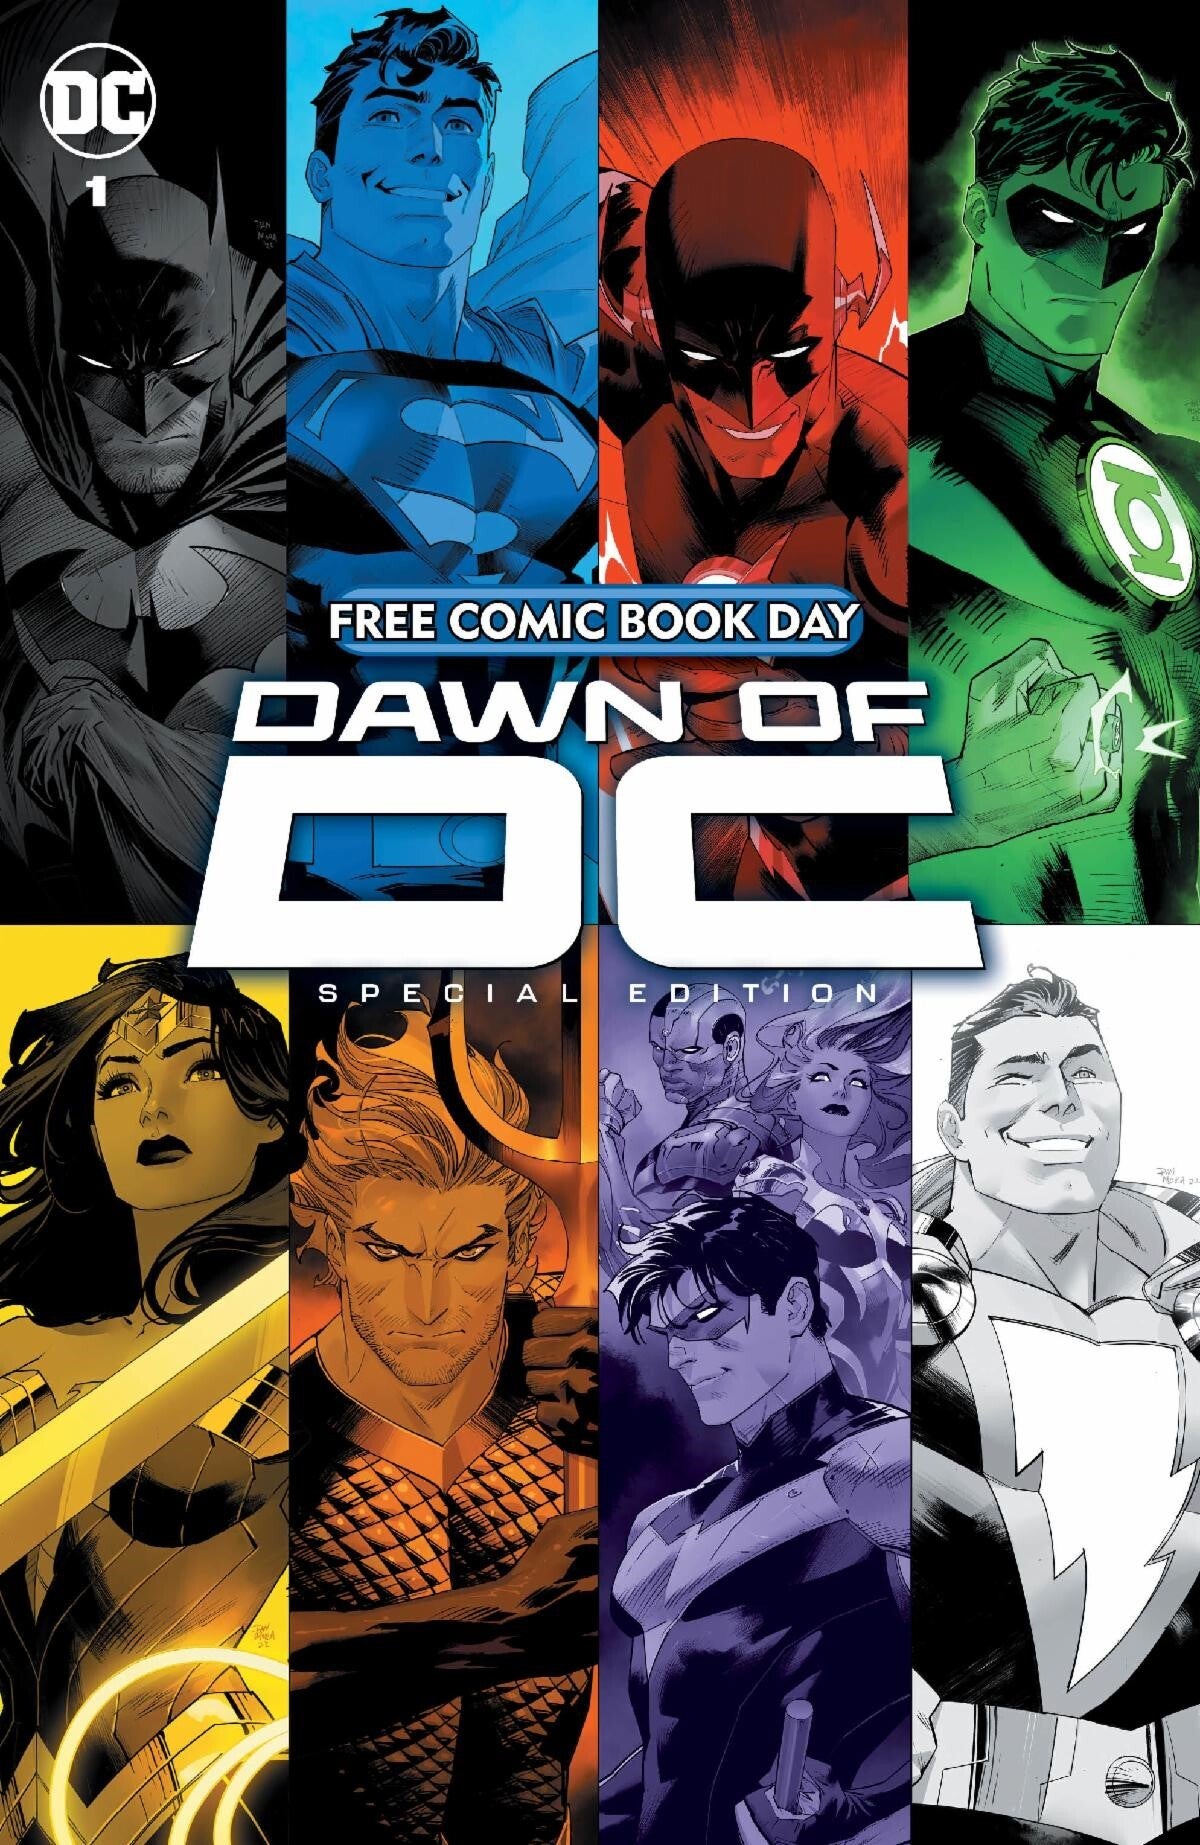 Cover of Dawn of DC Free Comic Book Day comic featuring individual color toned panels of Batman, Superman, Flash, Green Lantern, Wonder Woman